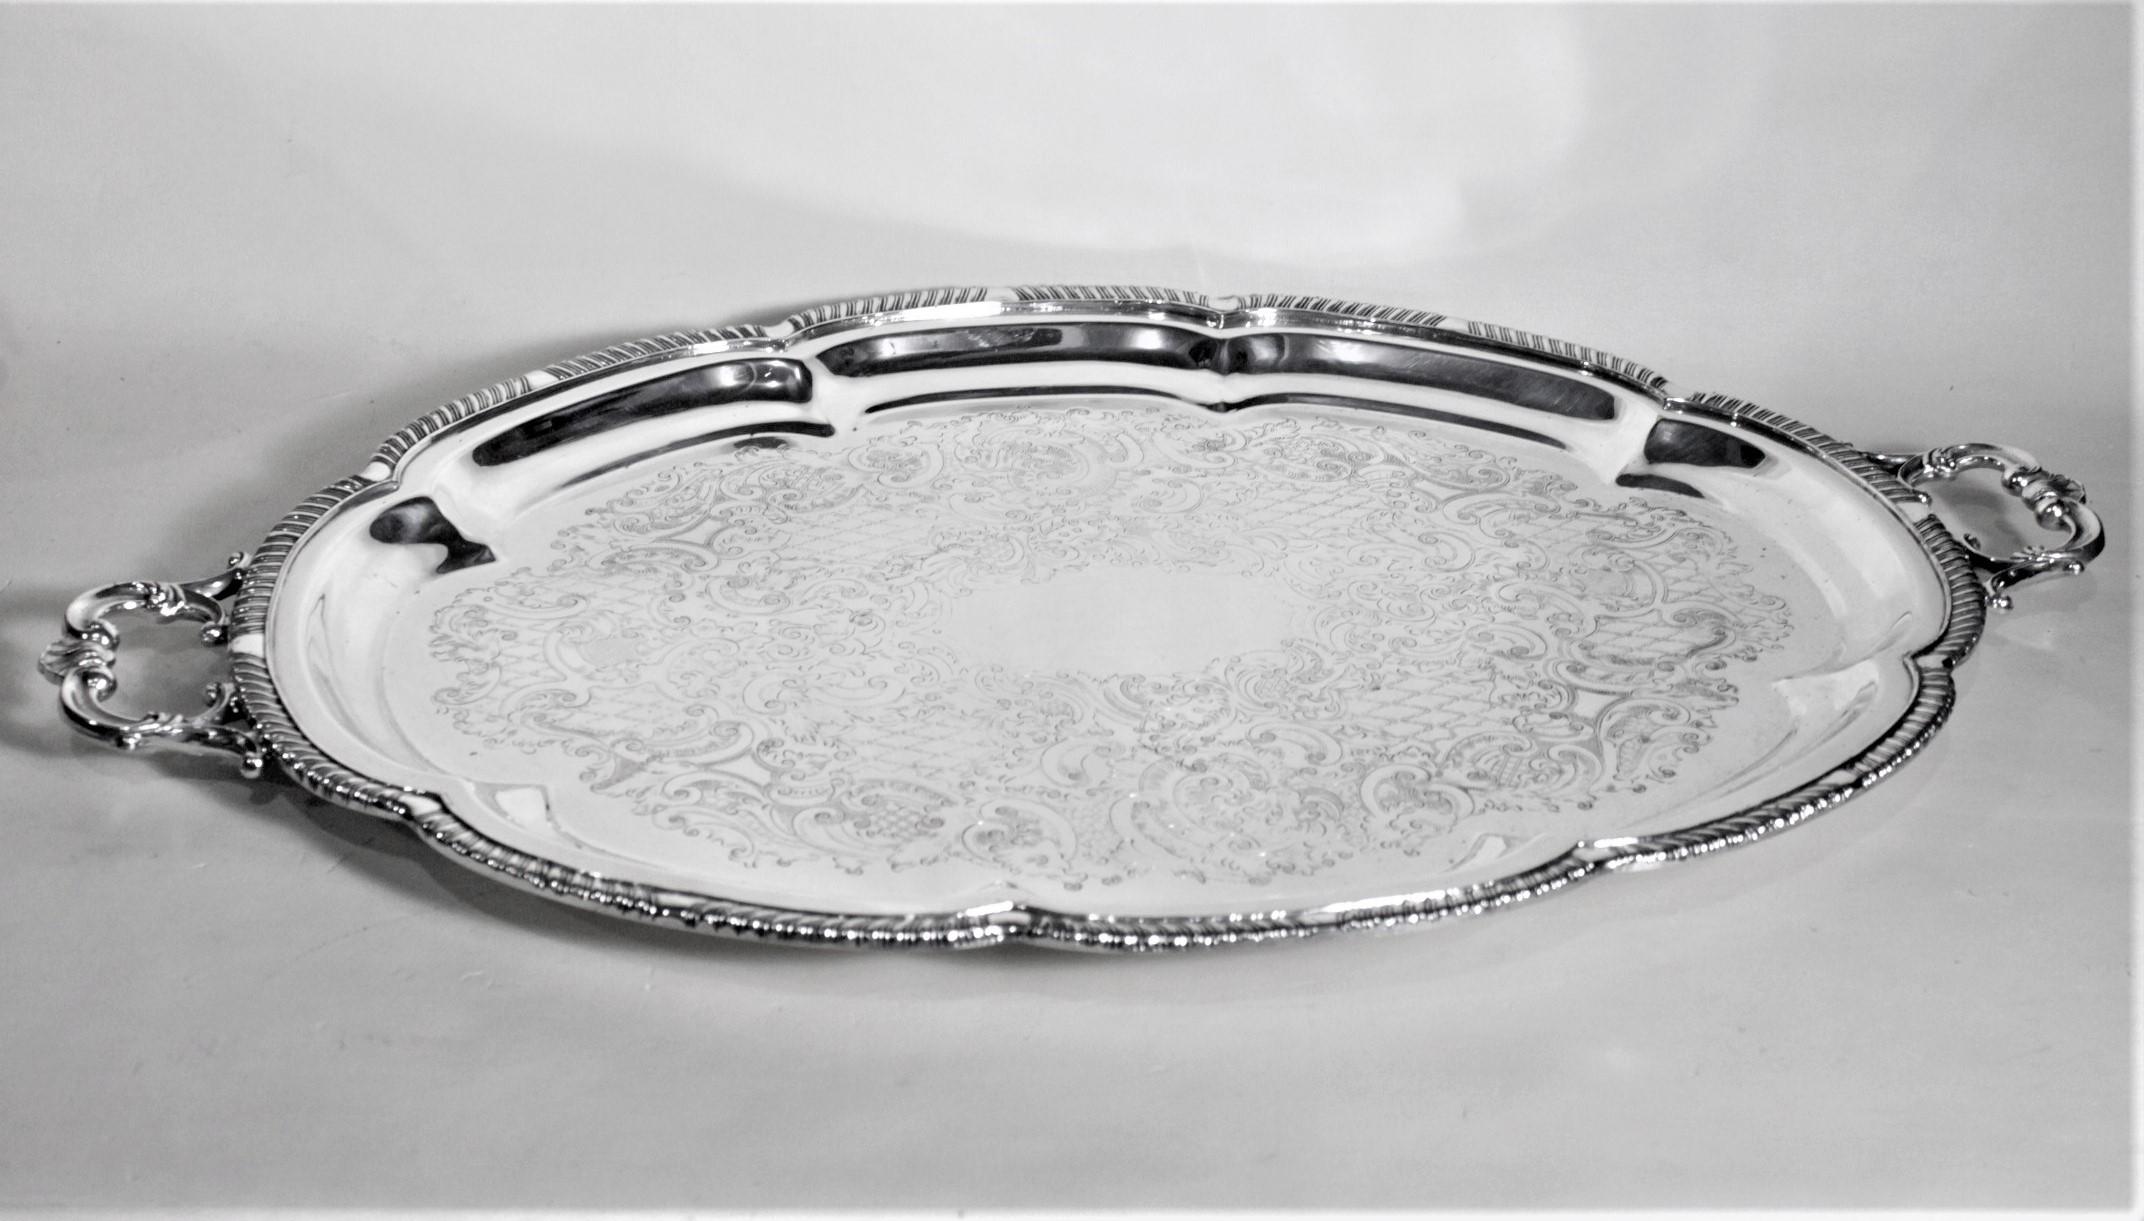 This antique styled silver plated serving tray was made by the Roger's Bros. of the United States in approximately 1950 in a Victorian style. The tray is silver plated copper in construction and has a scalloped tiered surround with a rope motif